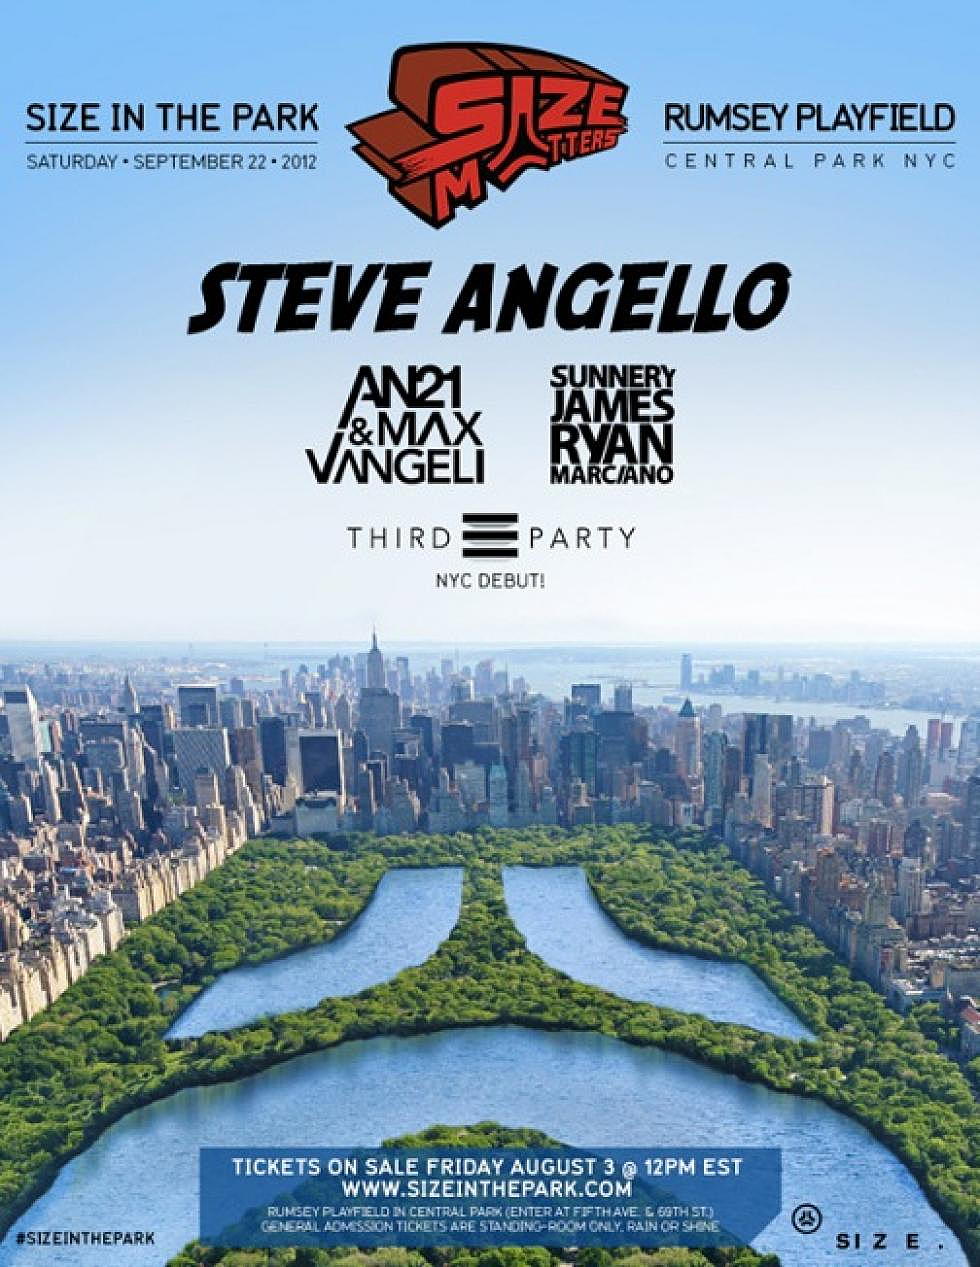 Size Matters Confirmed for Central Park NYC w/ Steve Angello, An21 &#038; Max Vangeli &#038; more